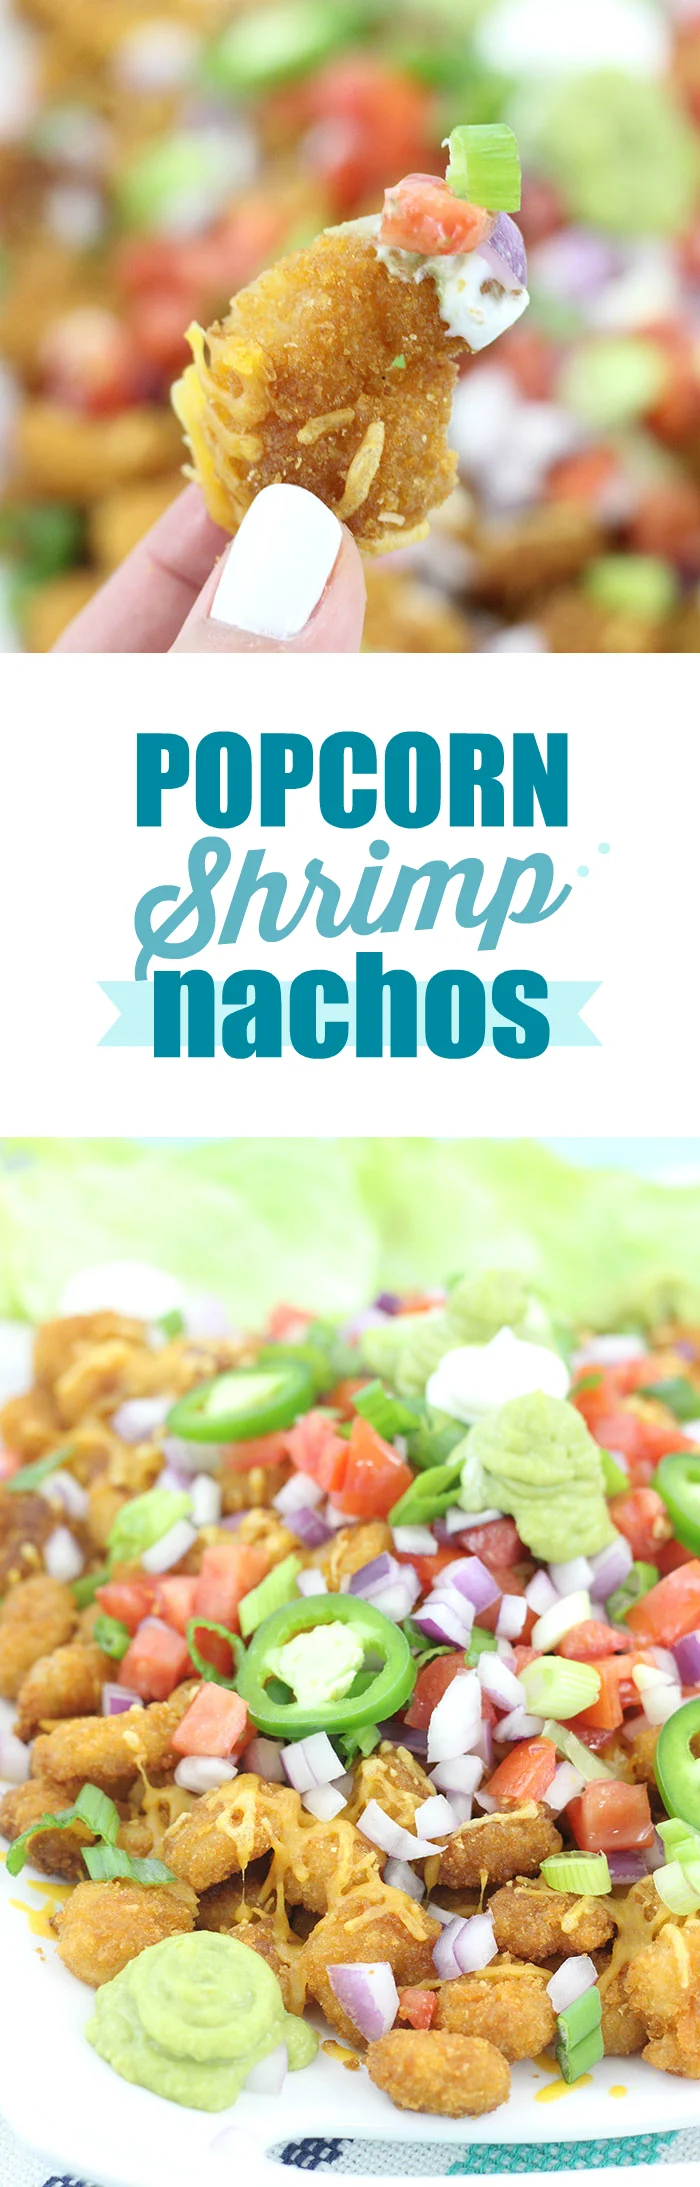 Shrimp Popper Nachos for a tasty twist that everyone needs to try.